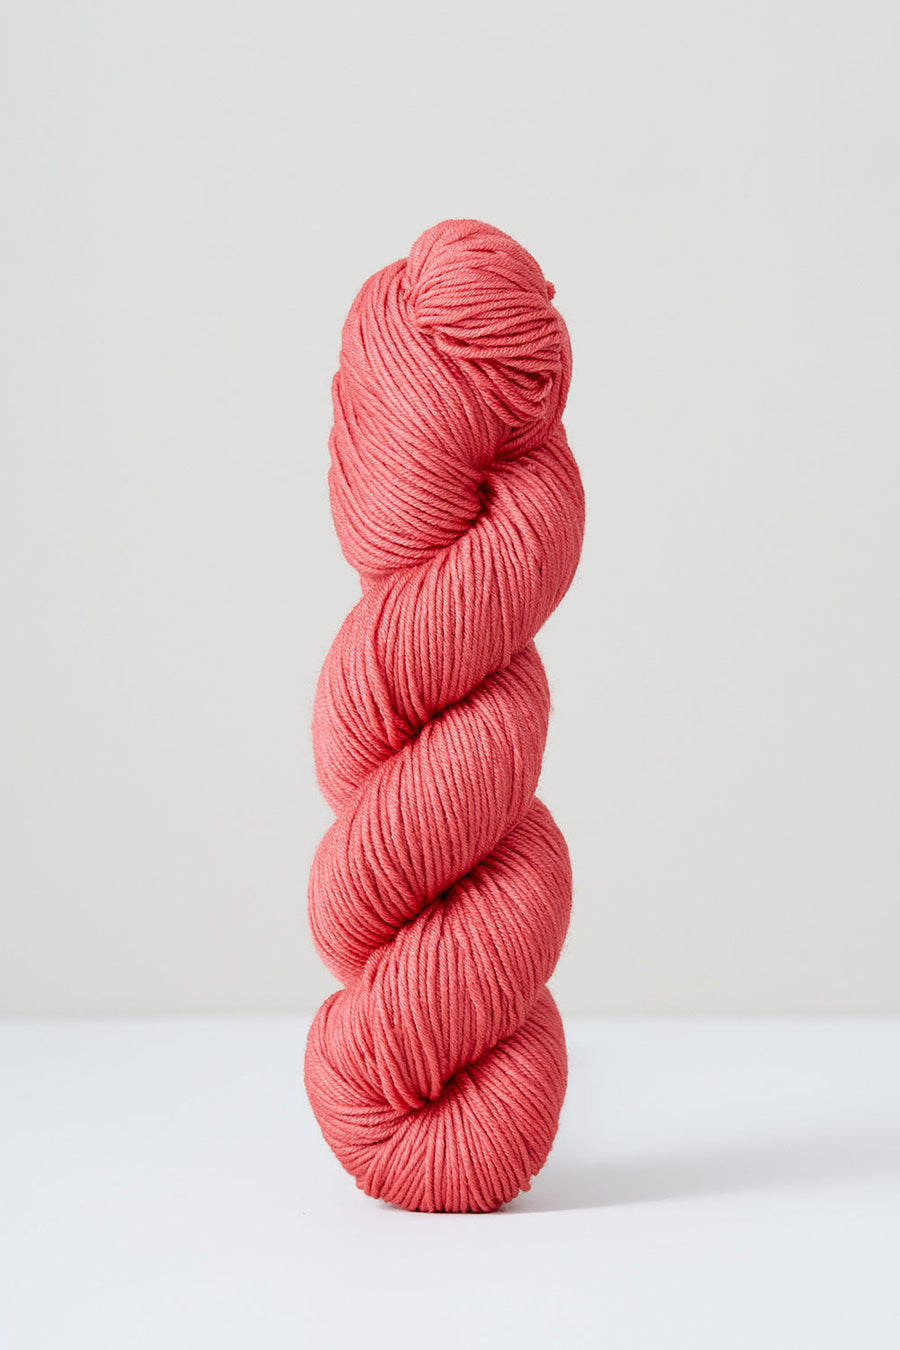 Harvest Worsted | Cranberry